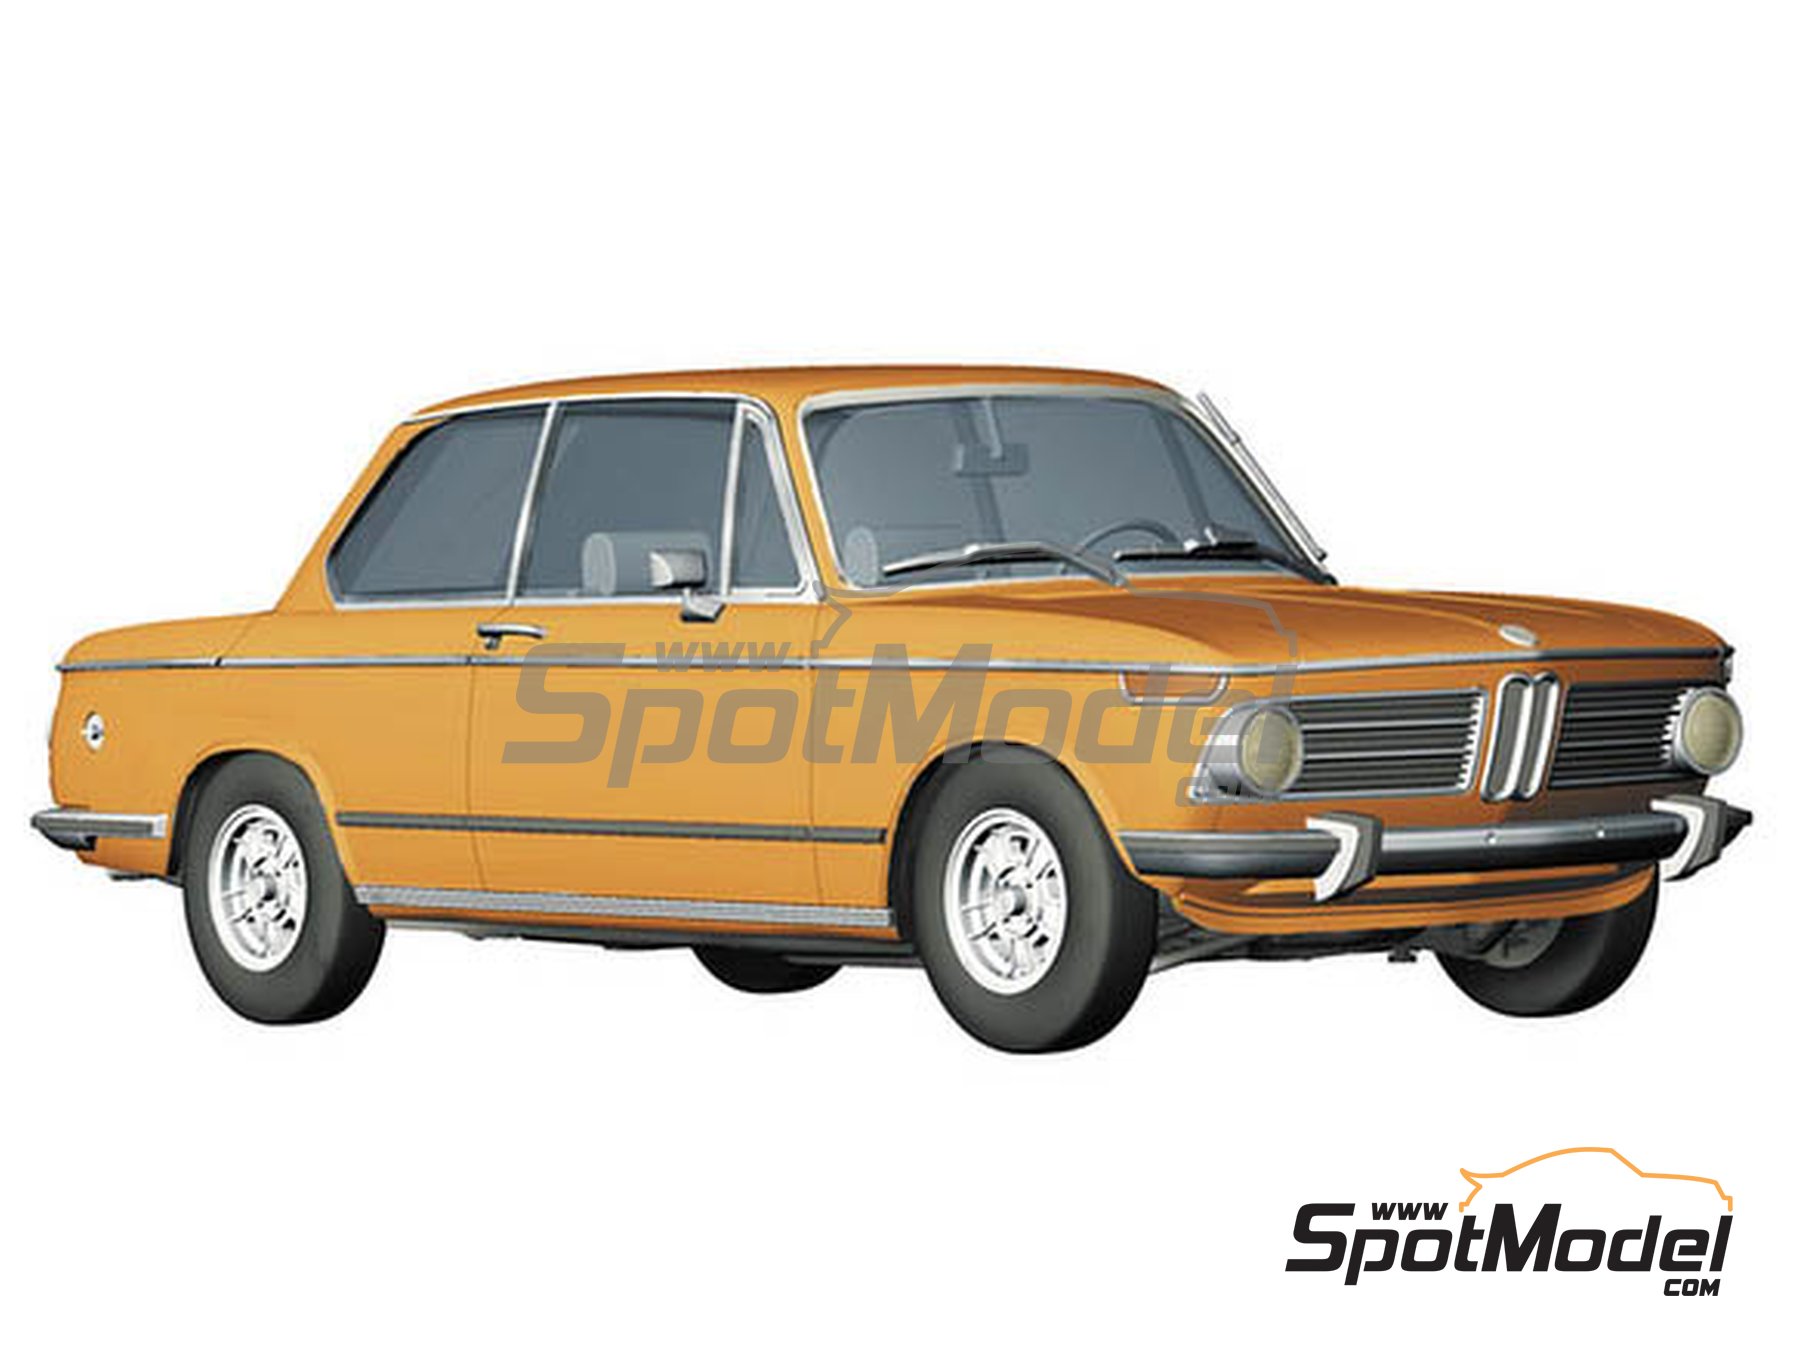 Hasegawa 1971 BMW 2002 Tii Hc23 1/24 Scale Plastic Model Kit for sale online 